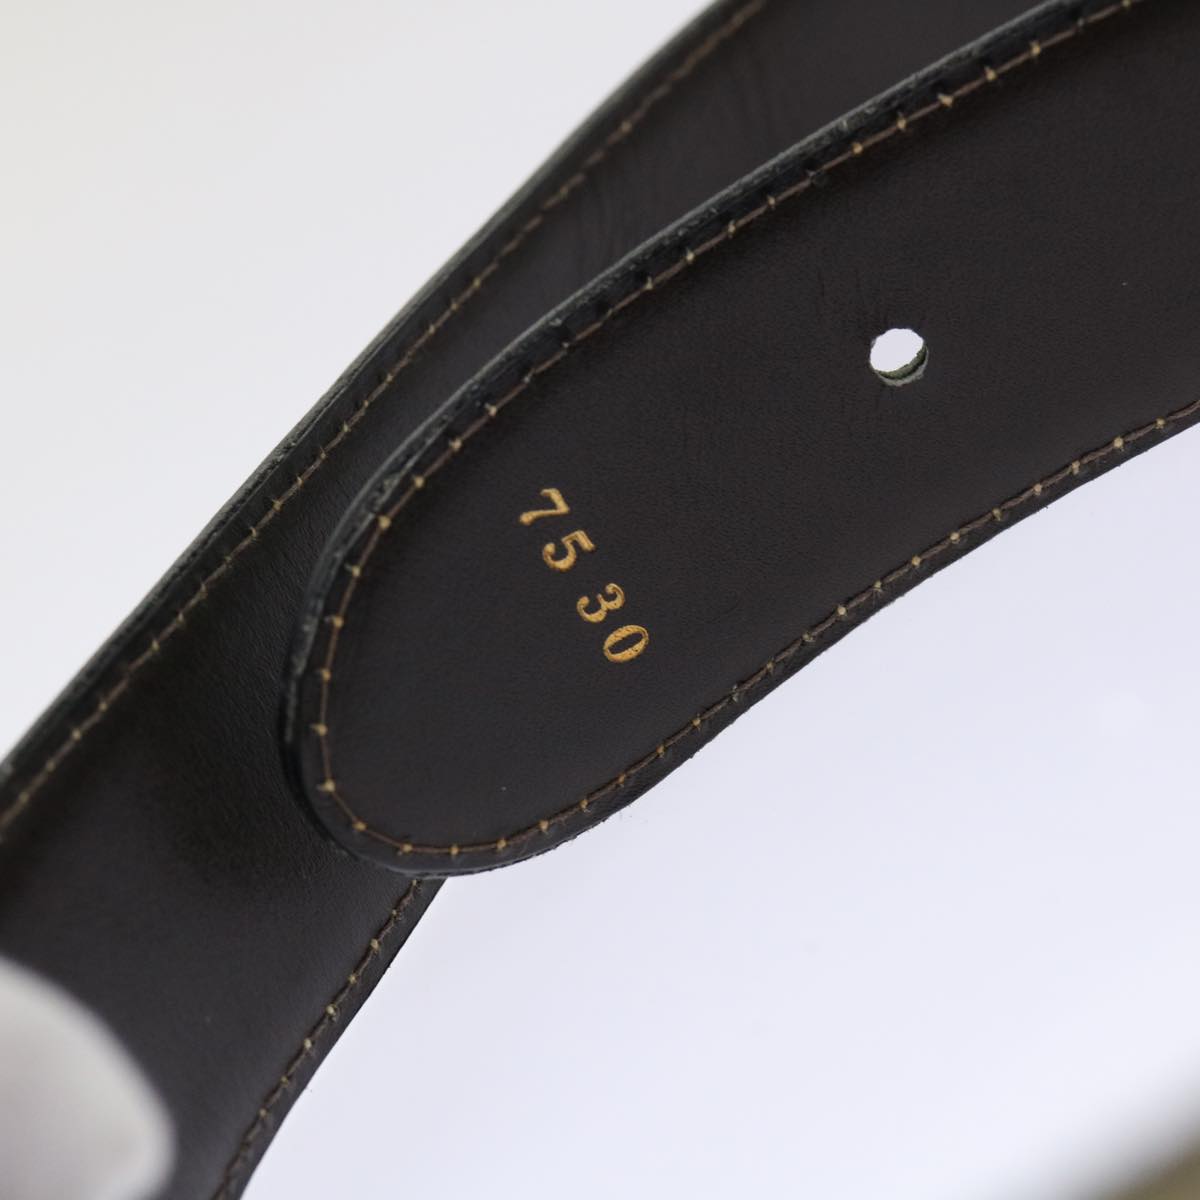 GUCCI Belt Leather 33.5"" White Auth am4713